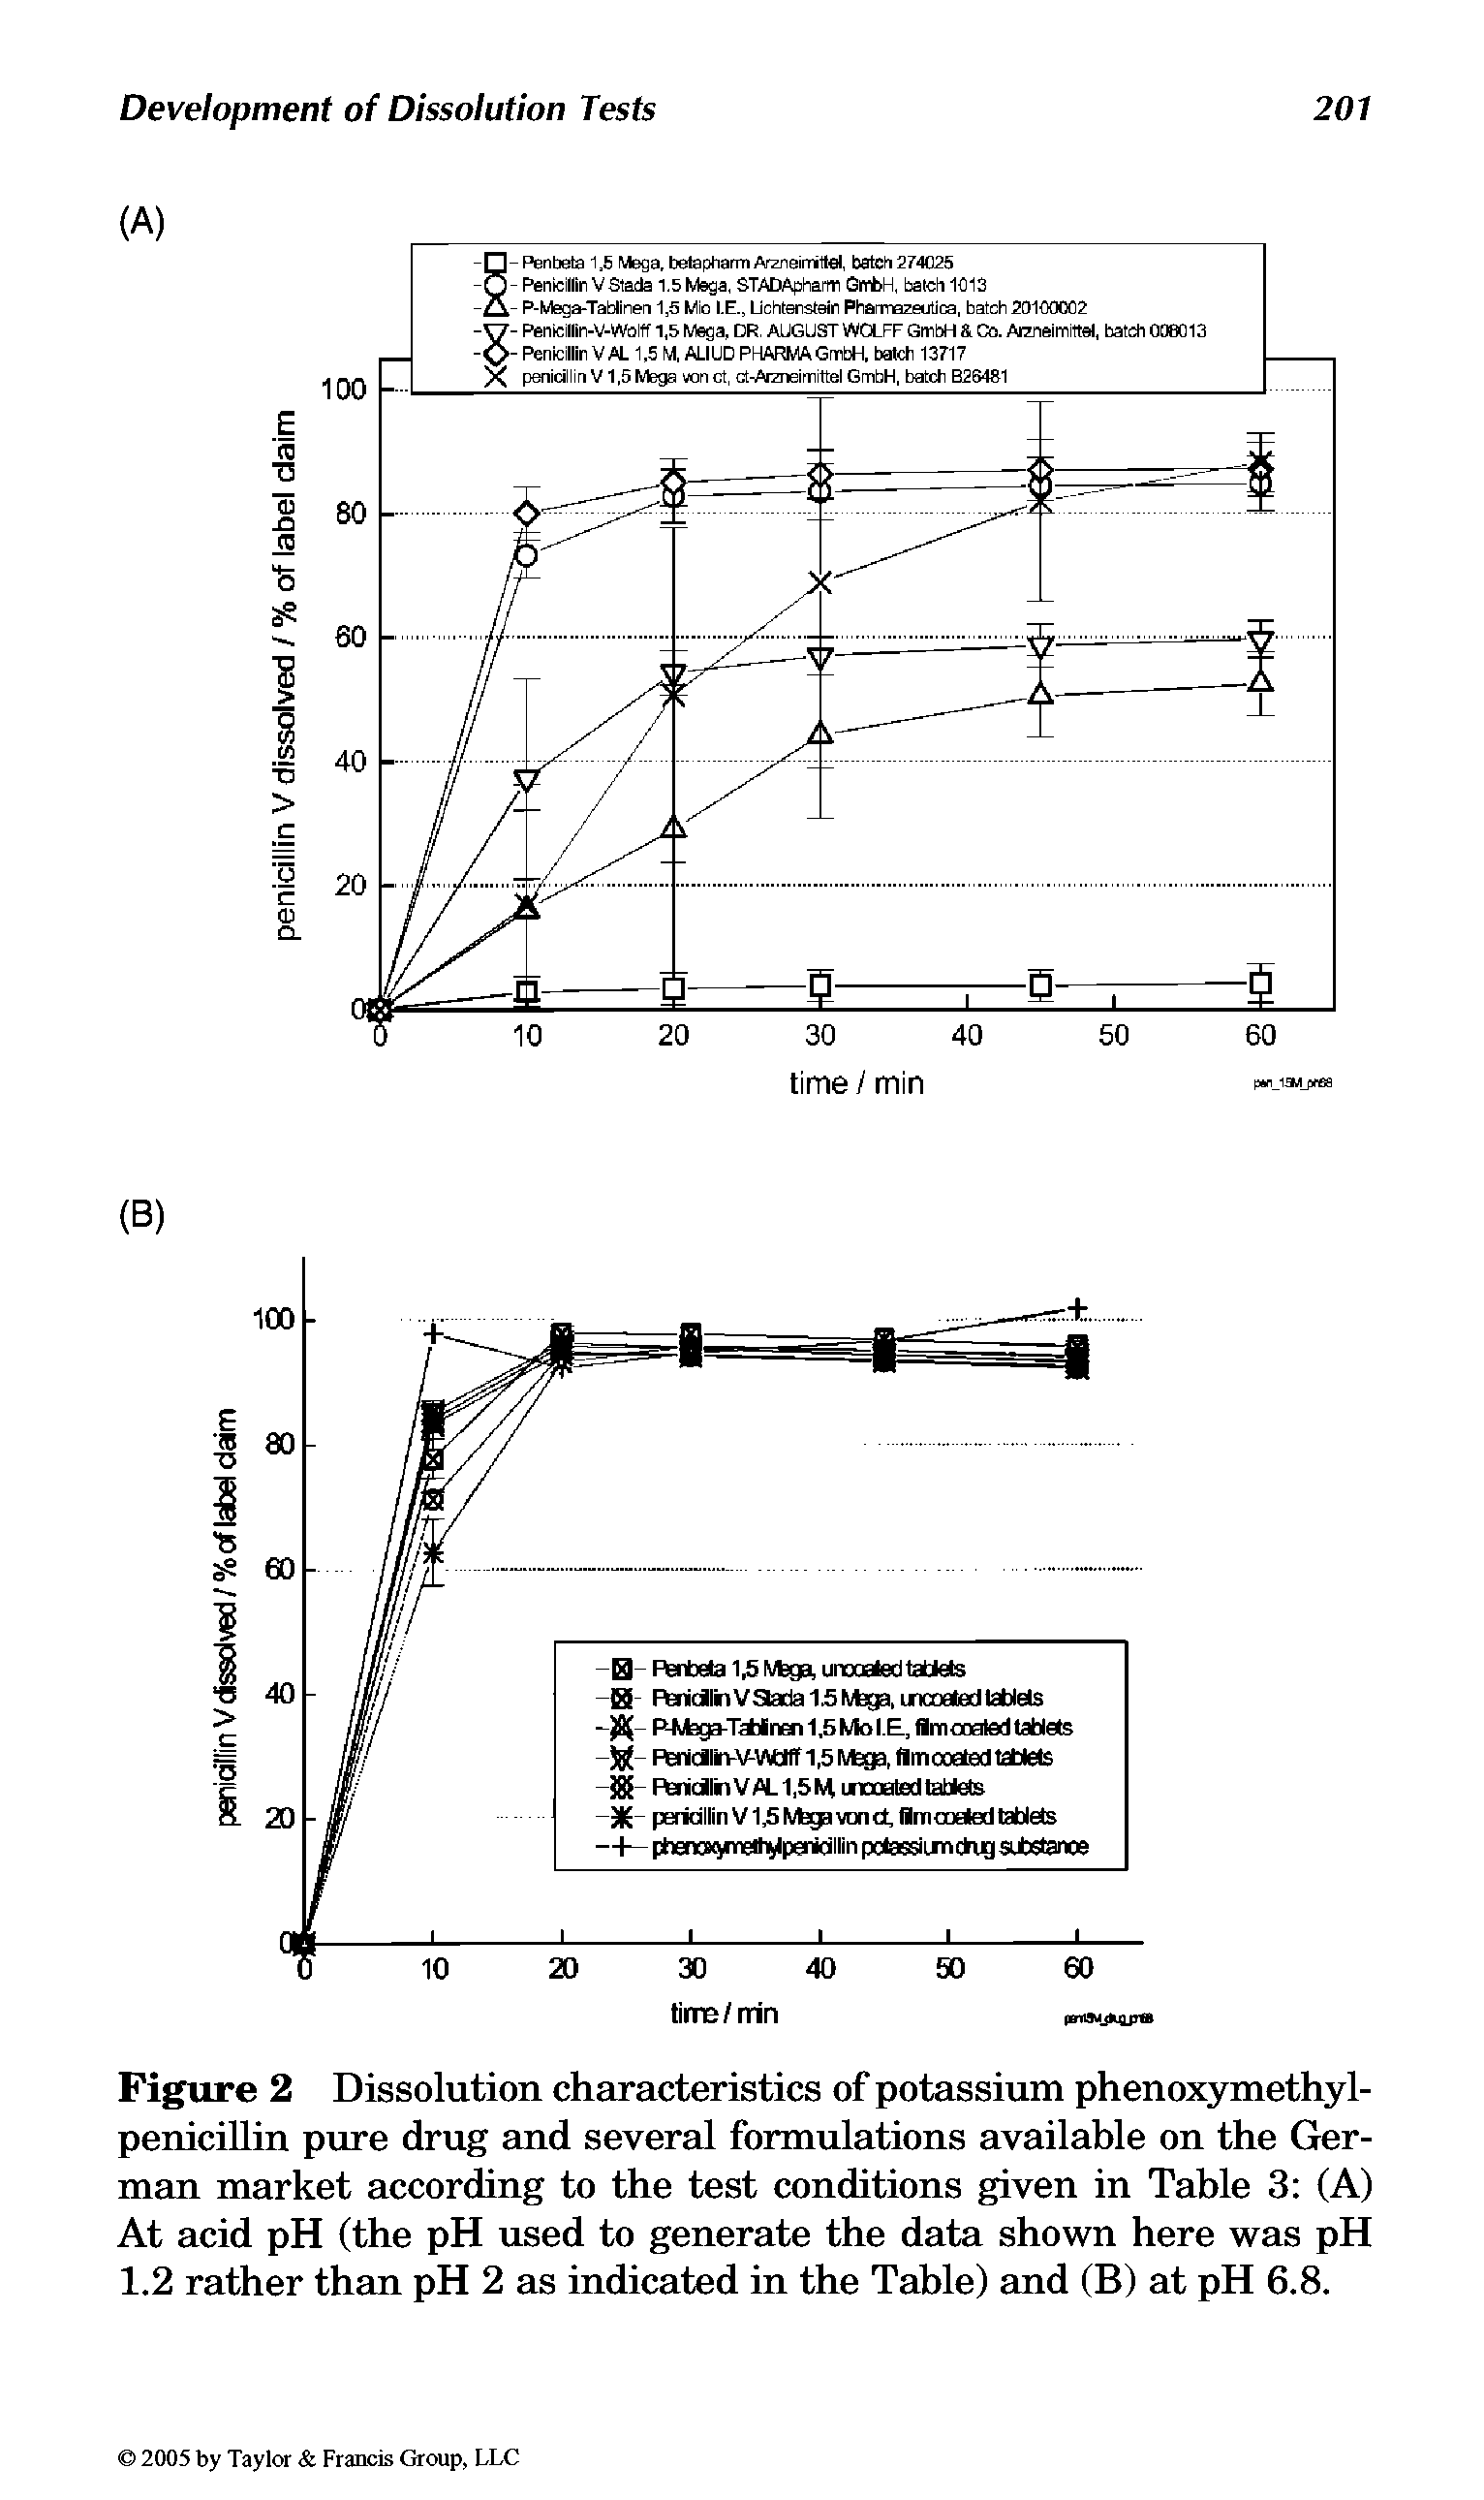 Figure 2 Dissolution characteristics of potassium phenoxymethyl-penicillin pure drug and several formulations available on the German market according to the test conditions given in Table 3 (A) At acid pH (the pH used to generate the data shown here was pH 1.2 rather than pH 2 as indicated in the Table) and (B) at pH 6.8.